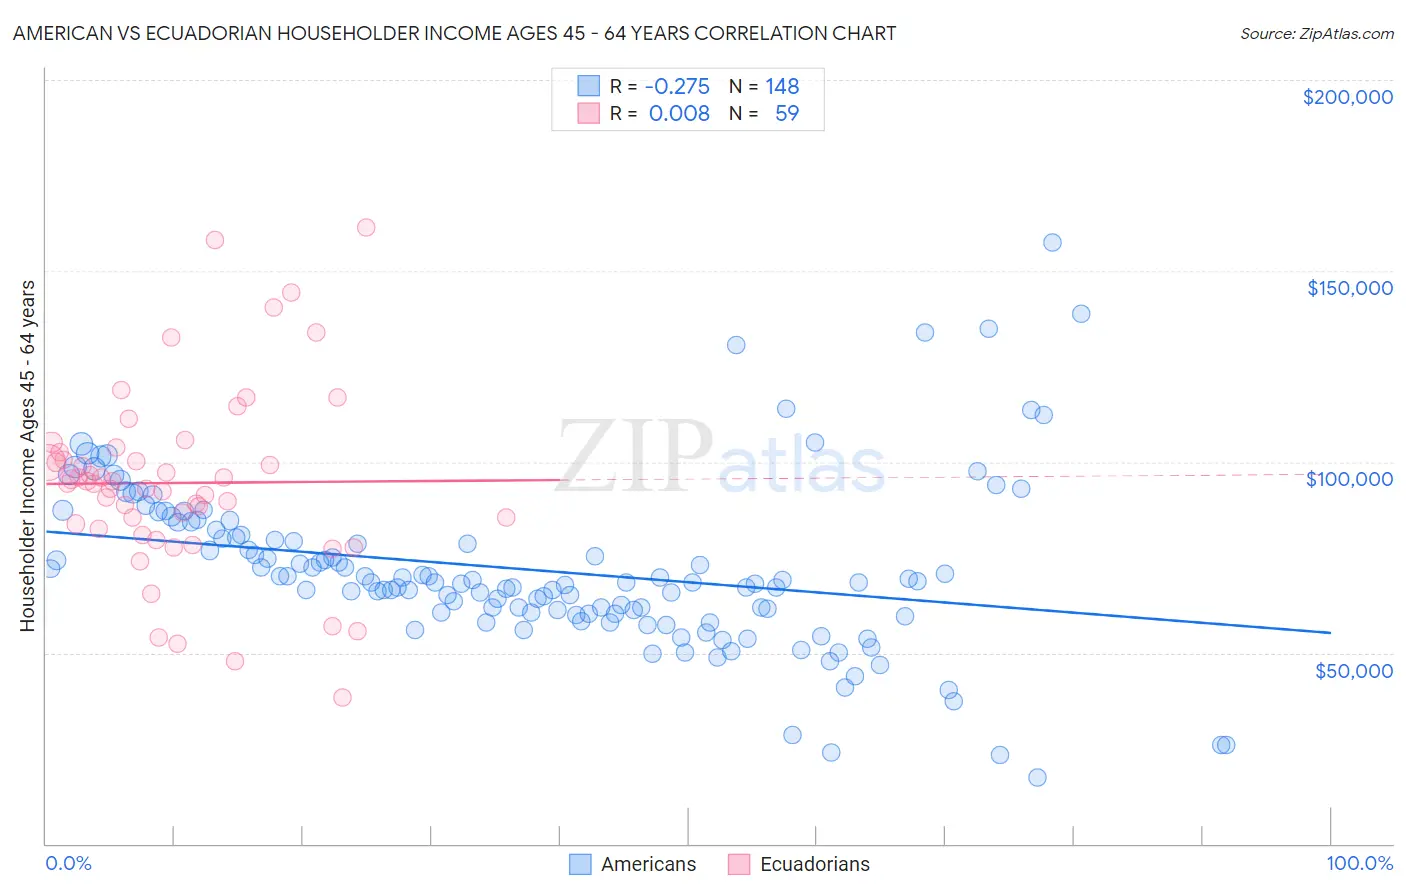 American vs Ecuadorian Householder Income Ages 45 - 64 years